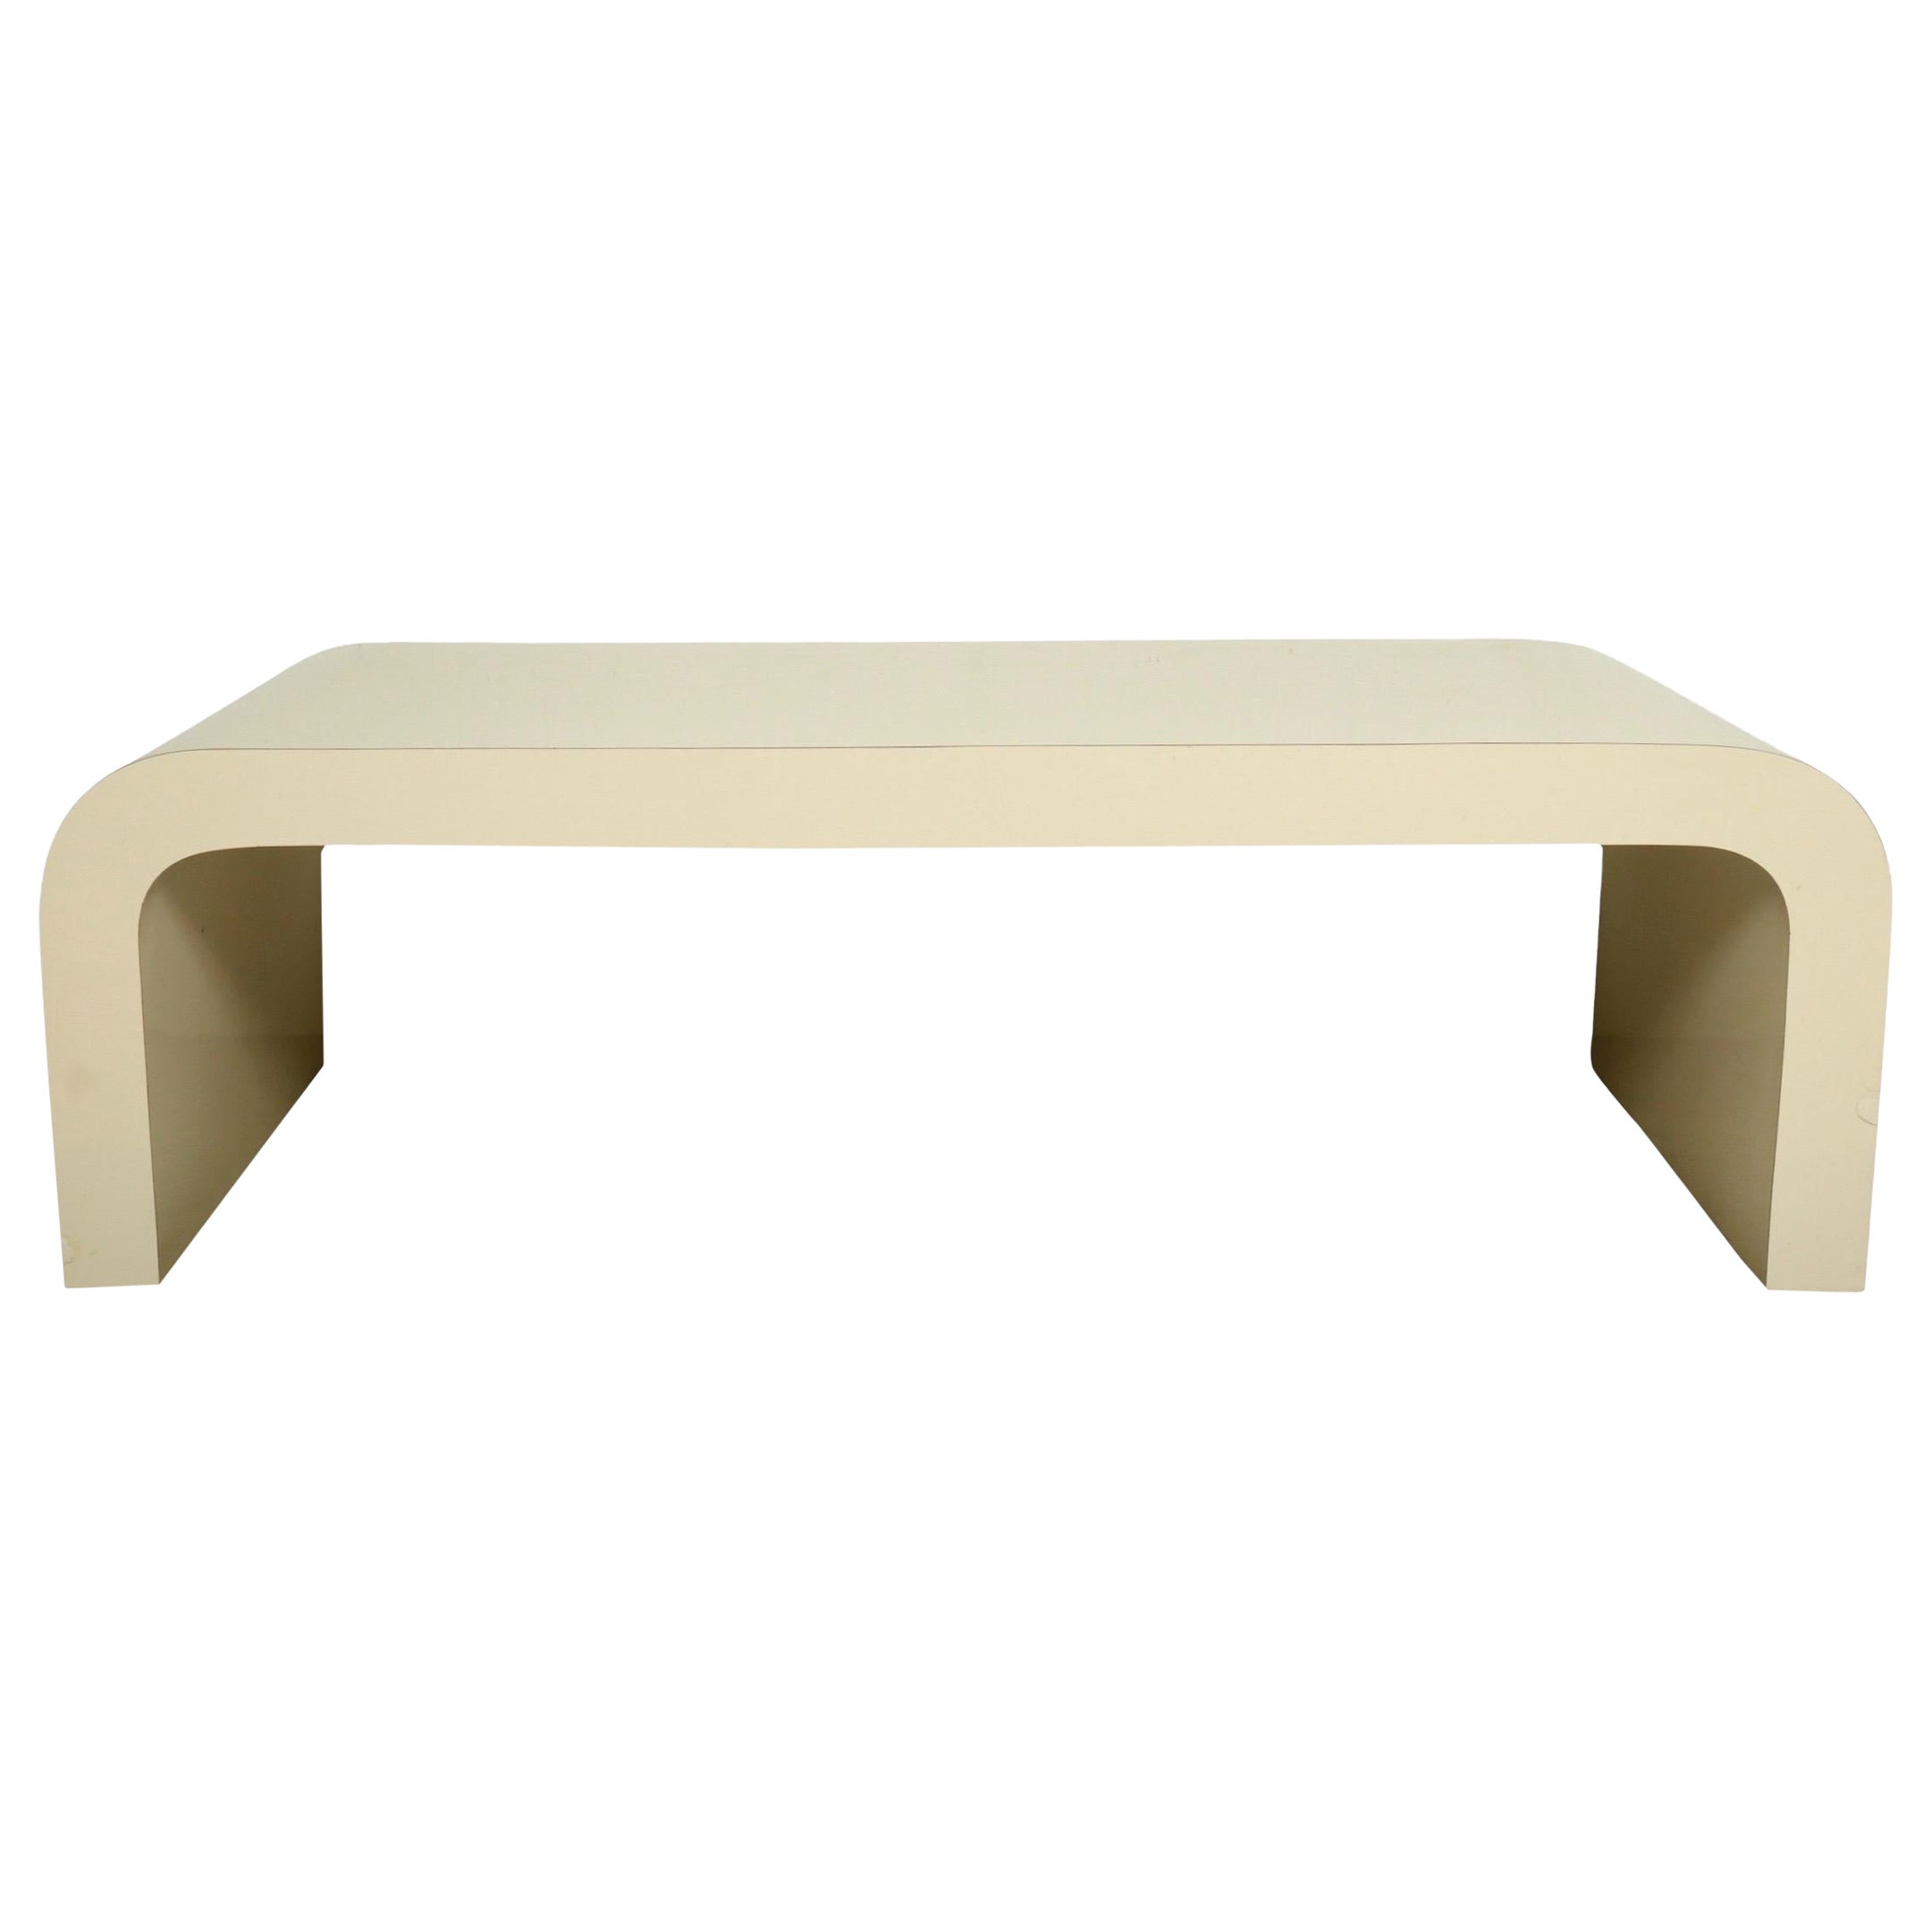 Parsons Waterfall Coffee Table or Bench